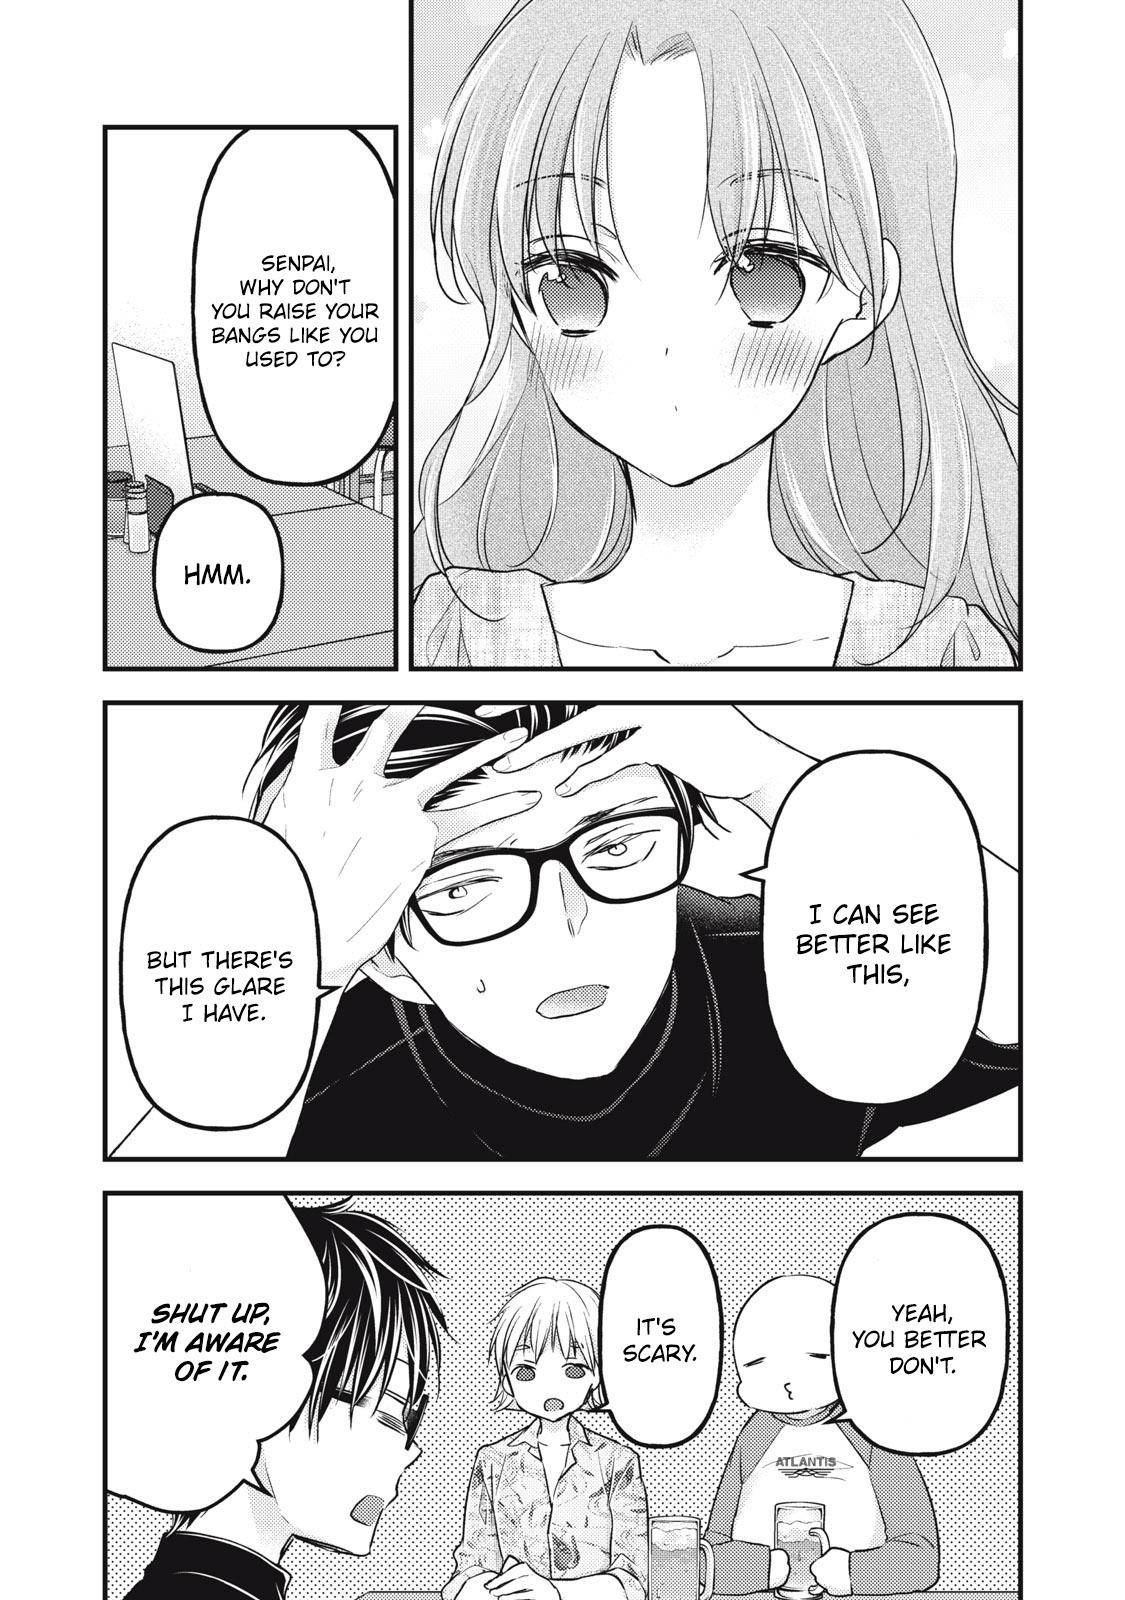 We May Be an Inexperienced Couple but... chapter 91 page 8